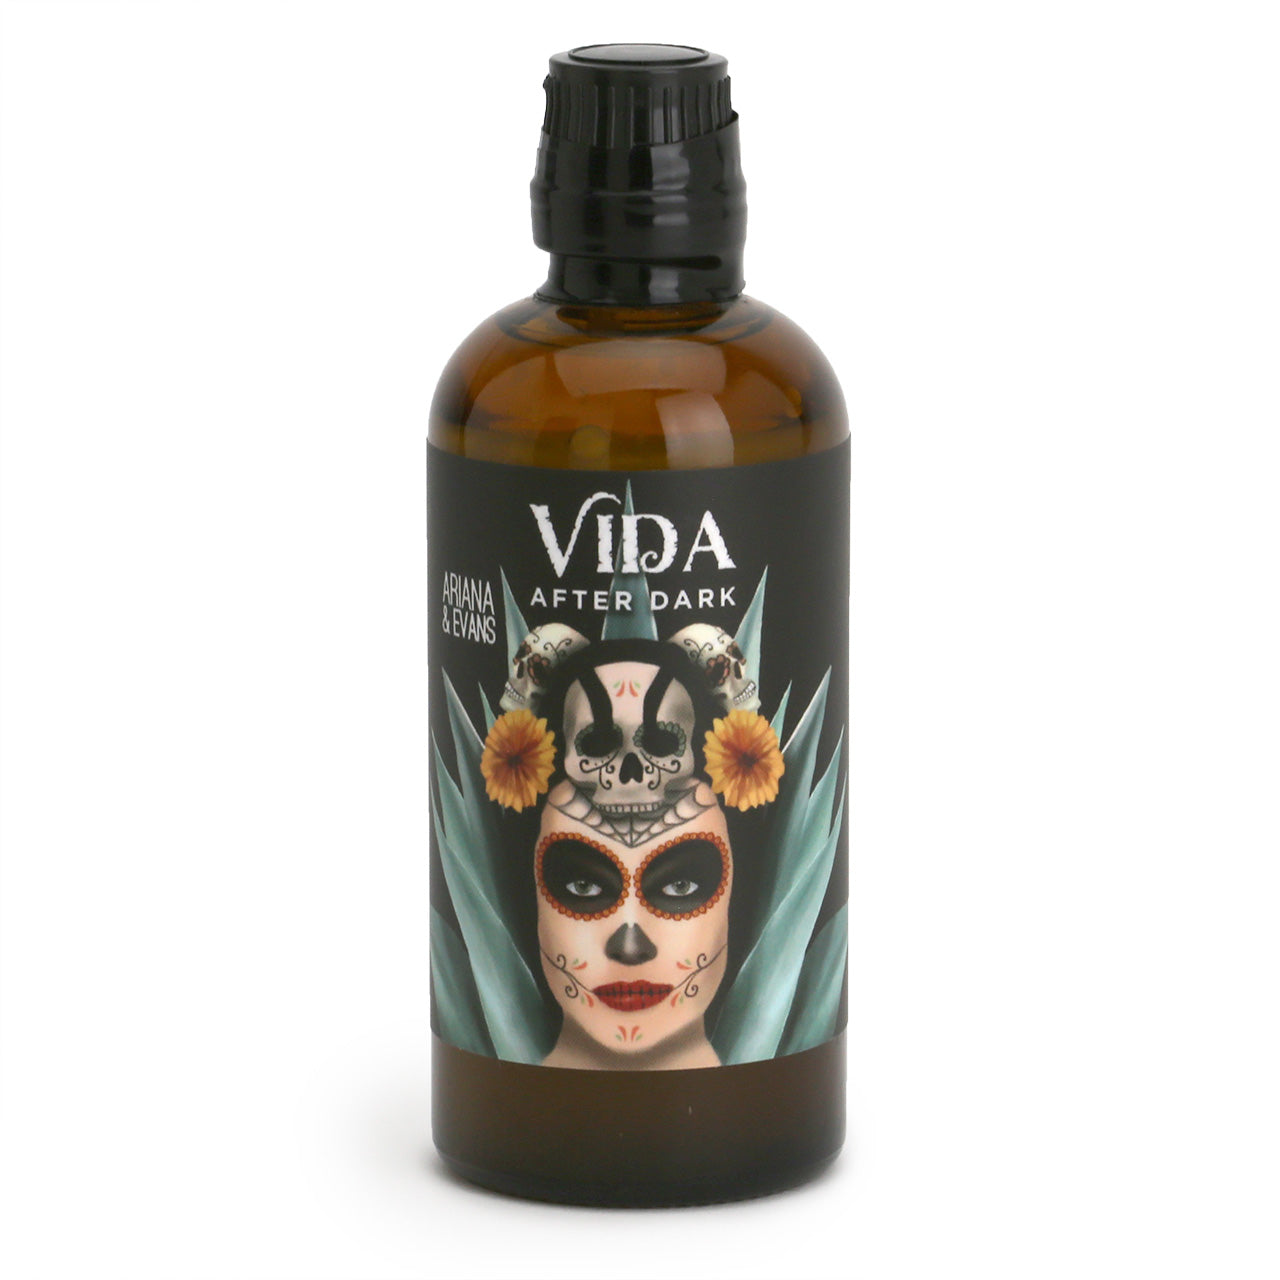 Amber bottle with woman's painted face on the label for Ariana & Evans Vida After Dark After Shave Splash Skinfood 